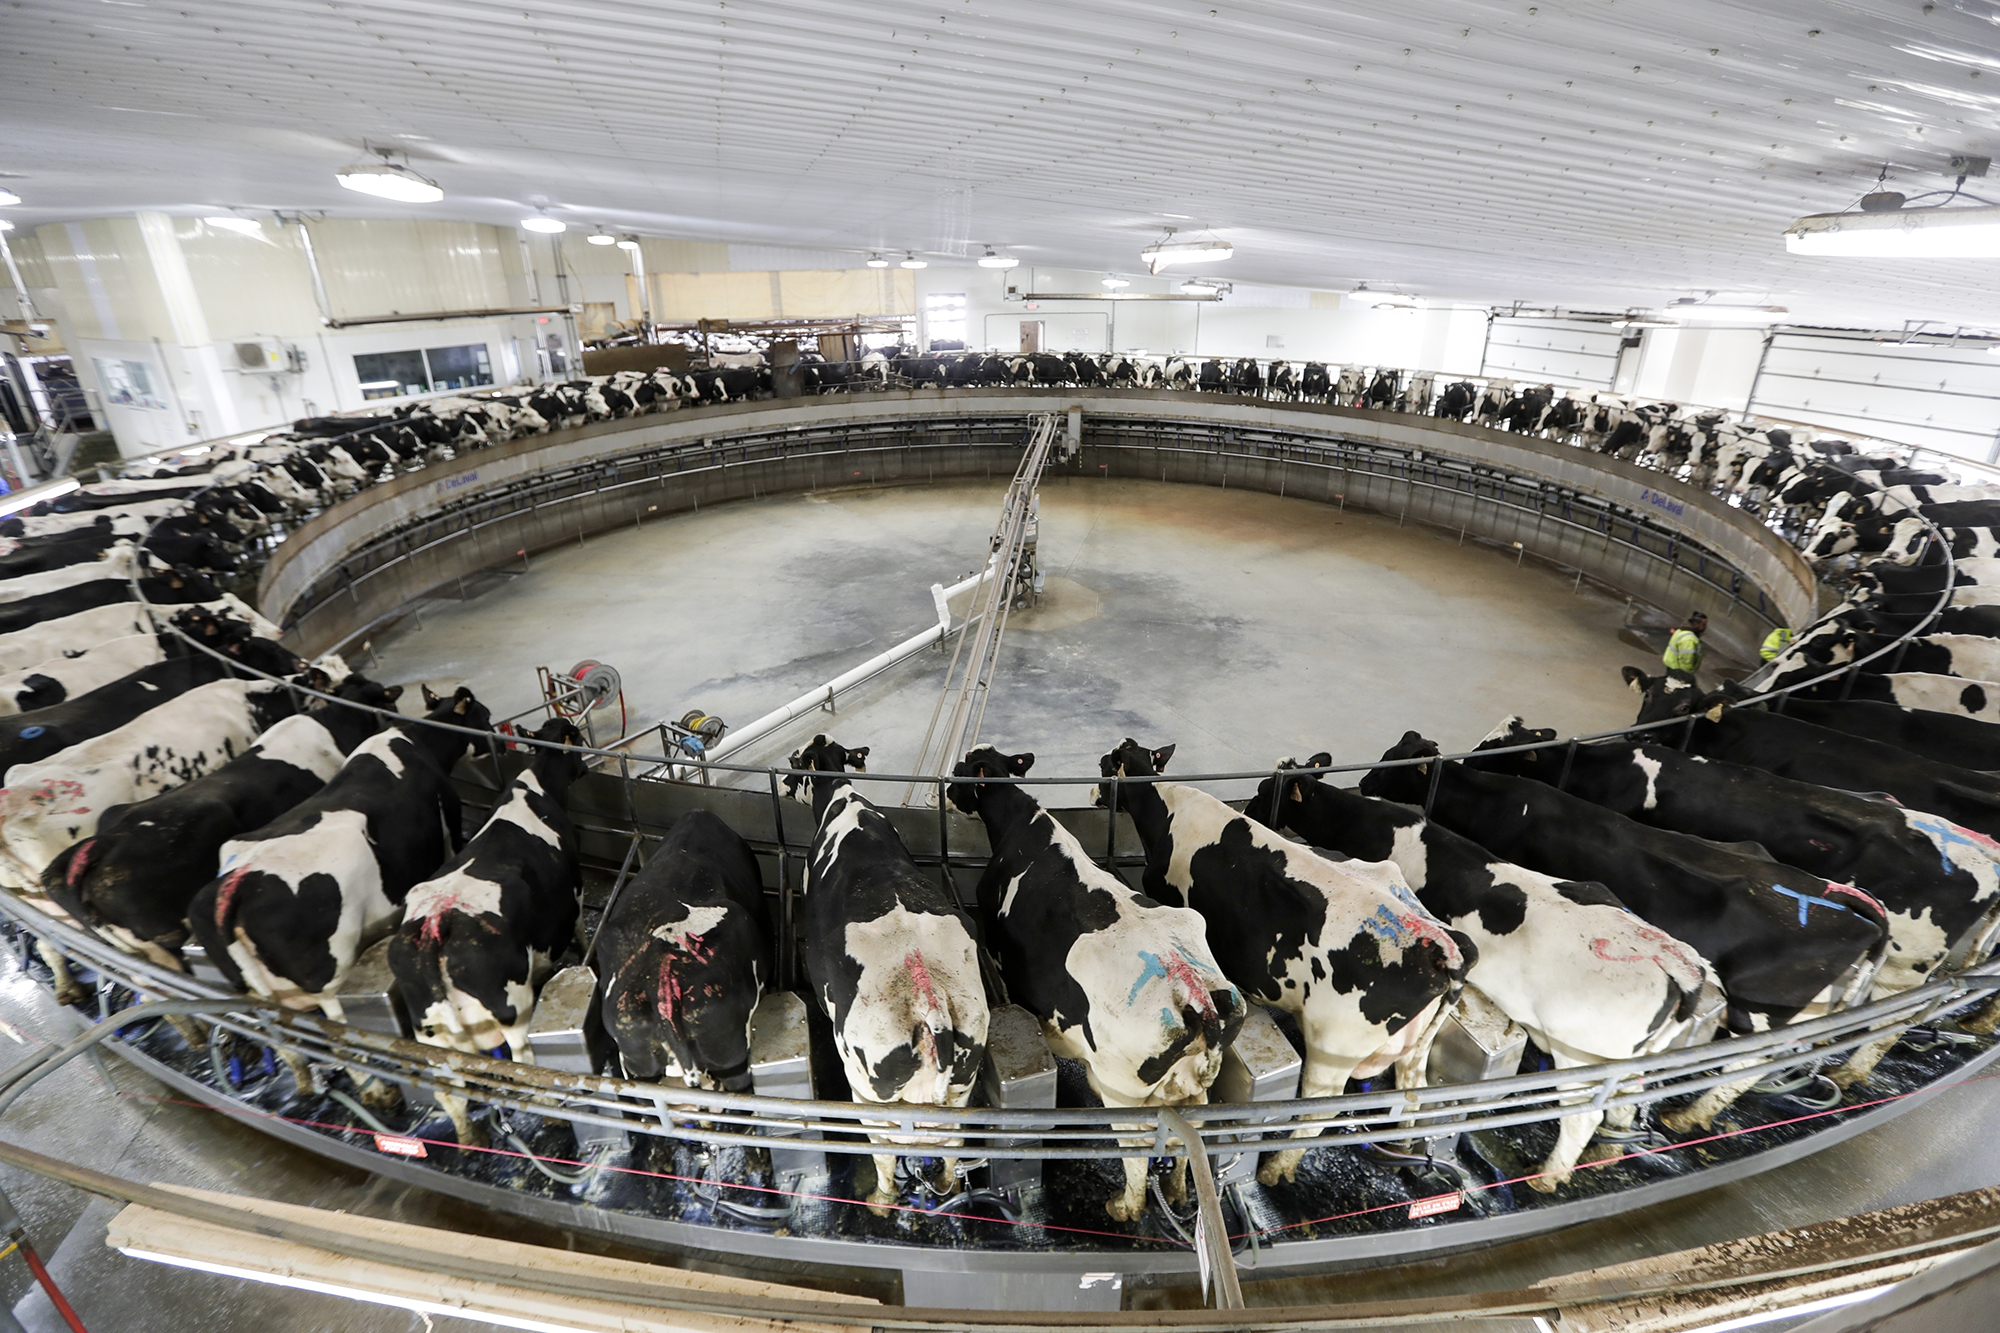 Cows are milked on a large carousel at the Rosendale Dairy in Pickett, Wis.